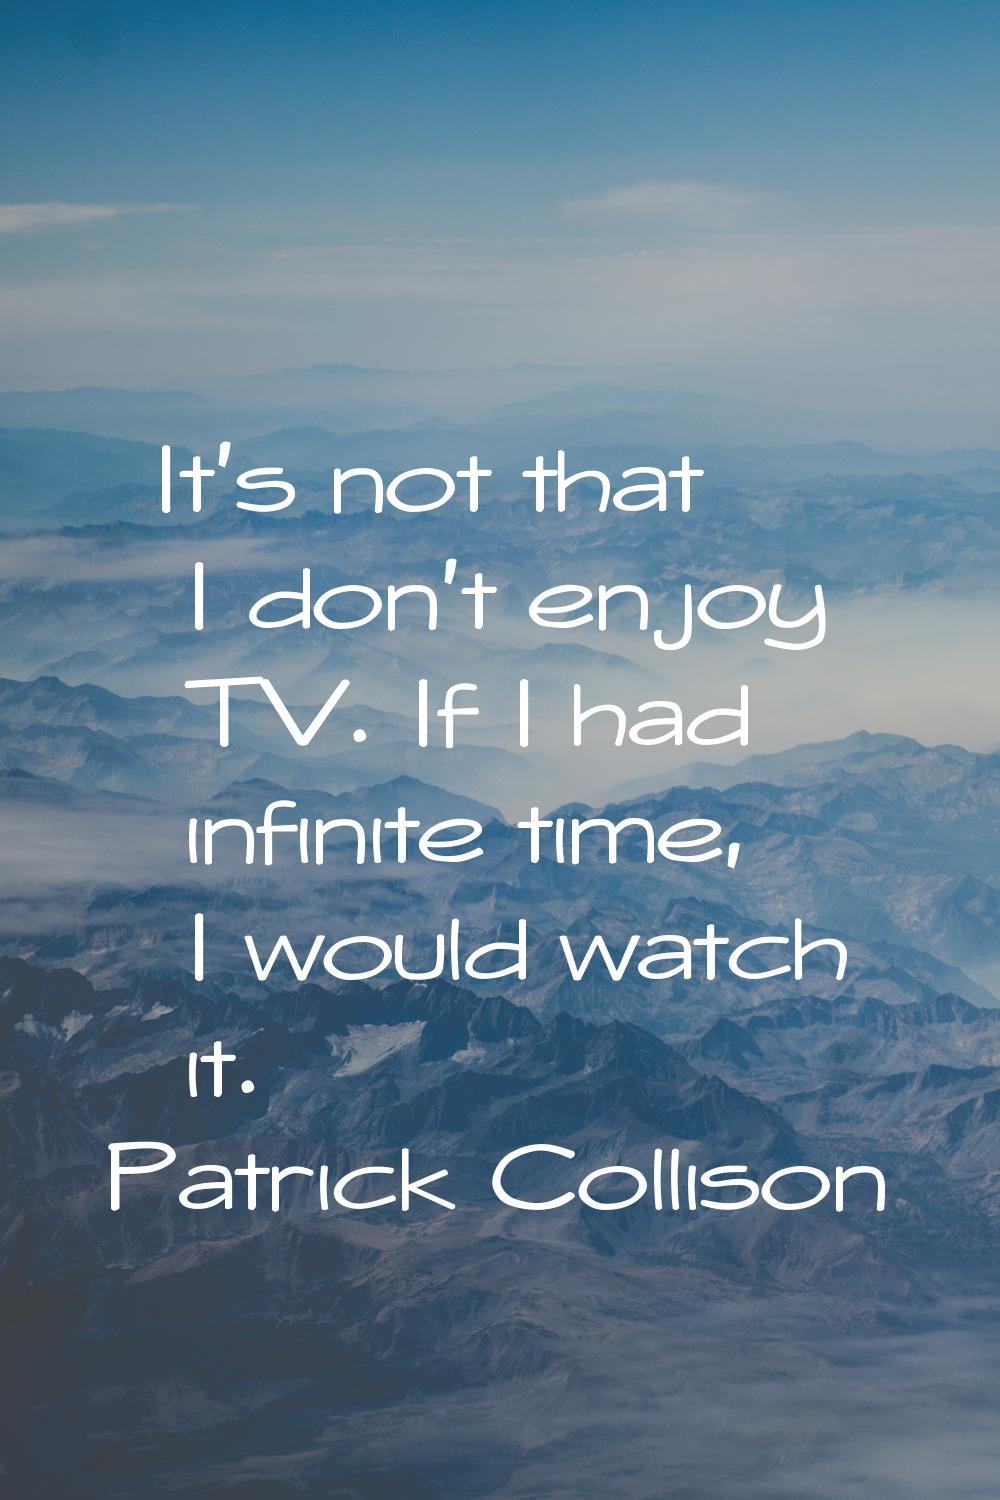 It's not that I don't enjoy TV. If I had infinite time, I would watch it.